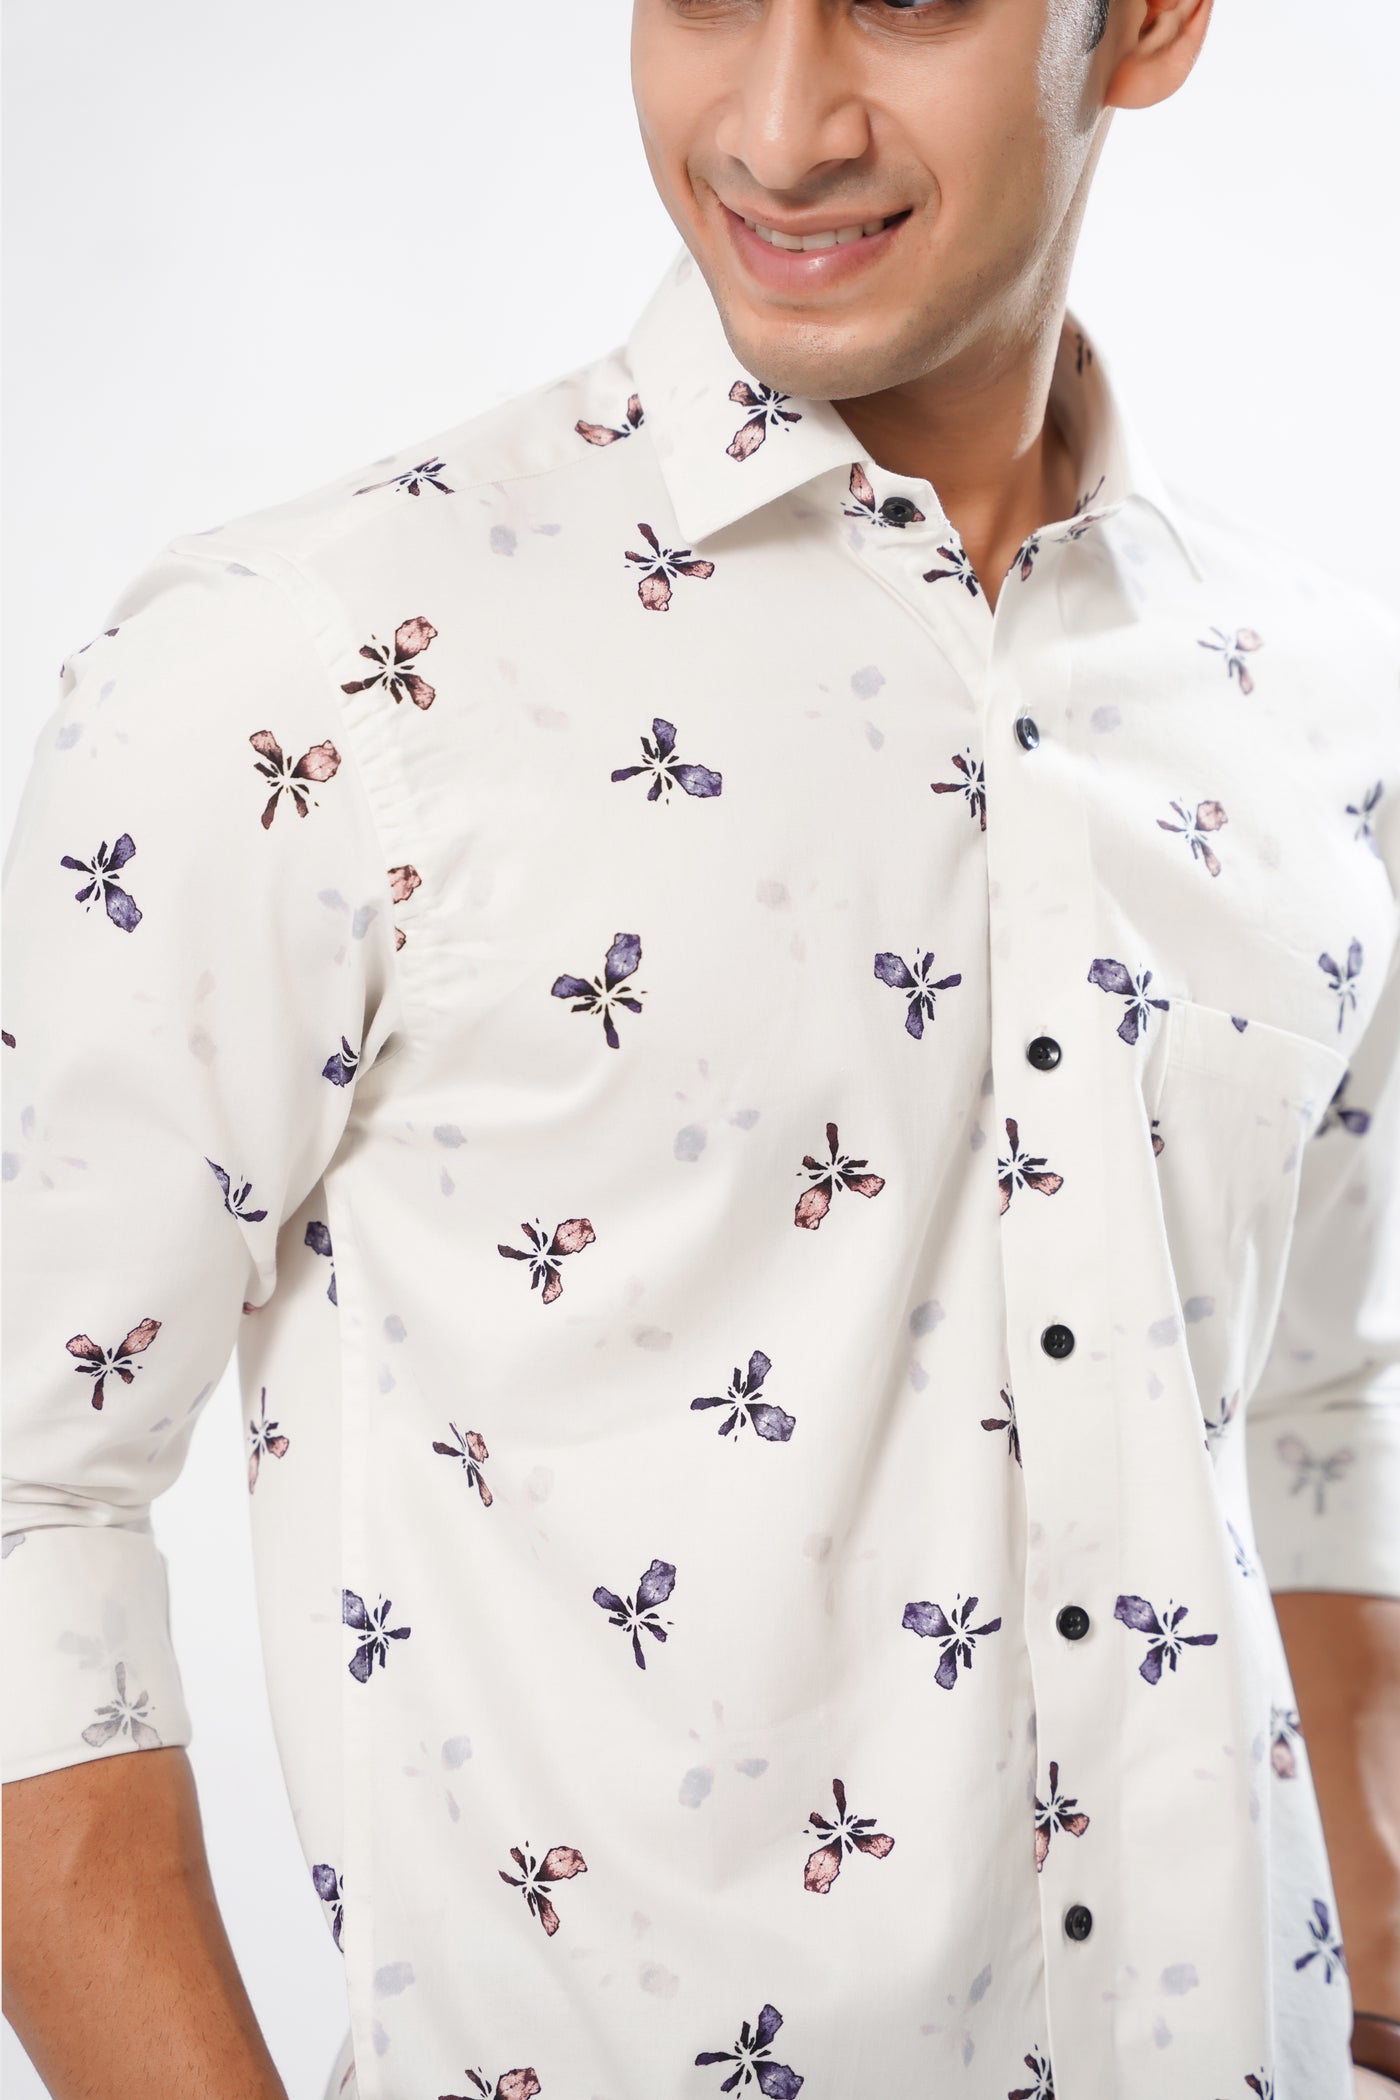 Bright White with Crop Orchid Flowers Printed Super Soft Premium Designed Cotton Shirt